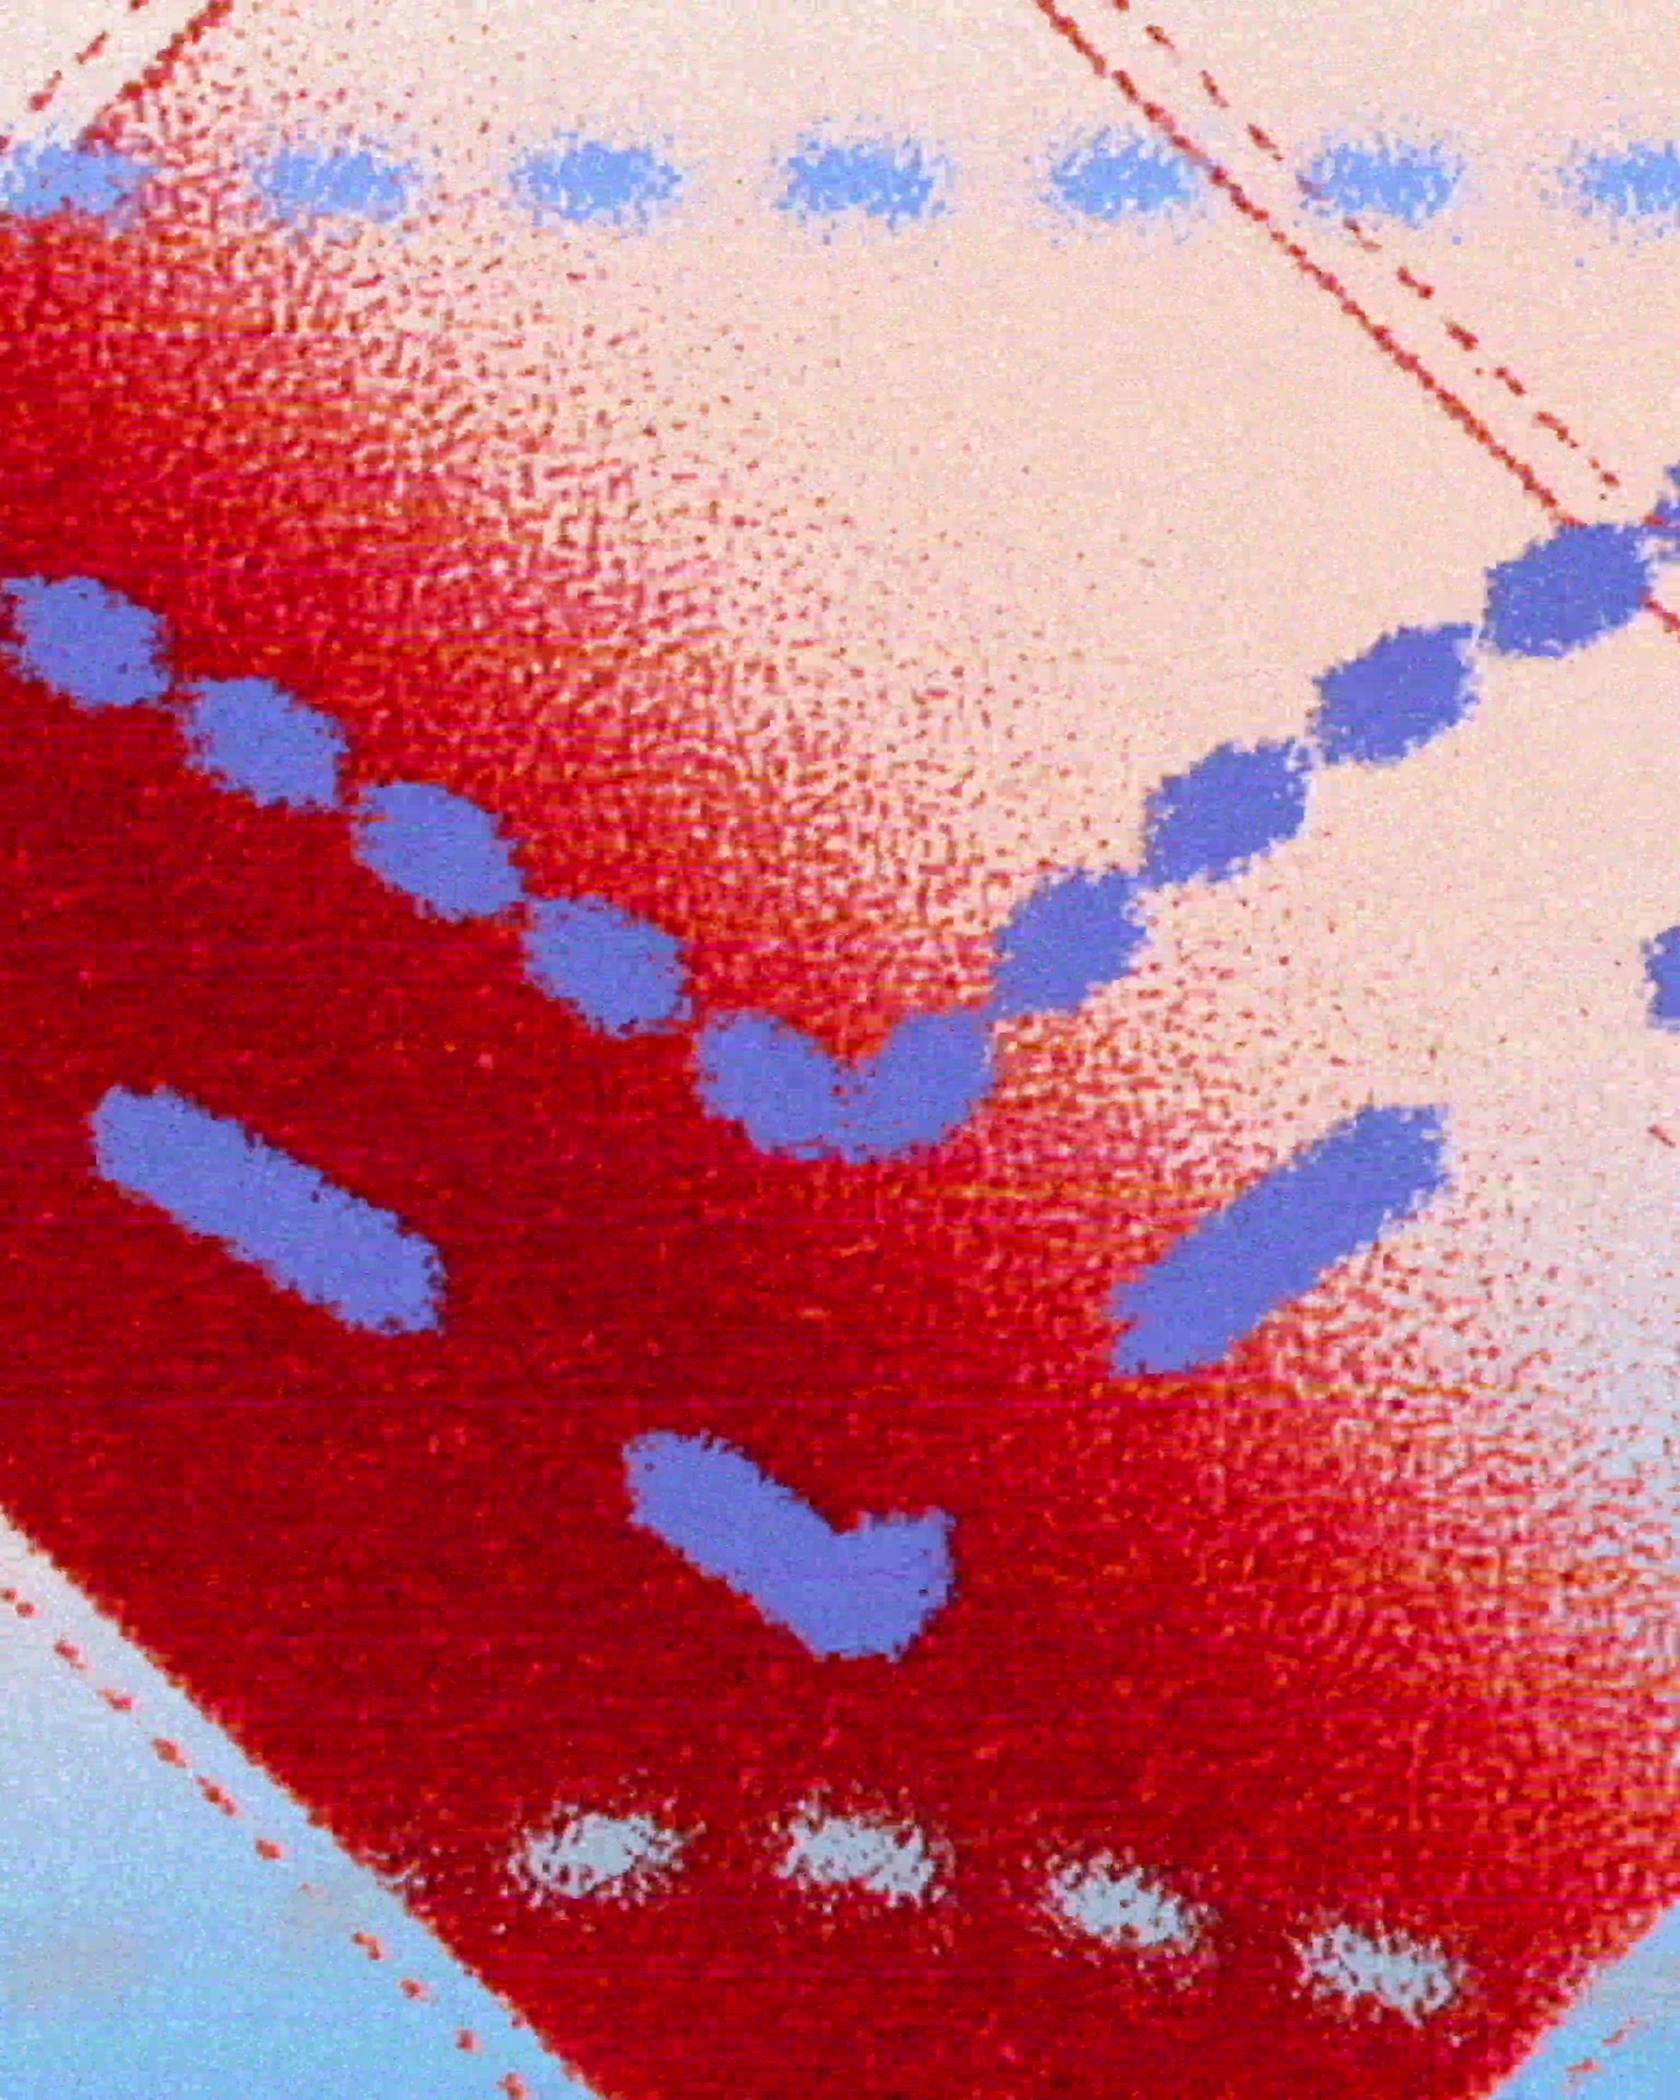 Animating Red Tab™ red, white and blue denim texture and stitching